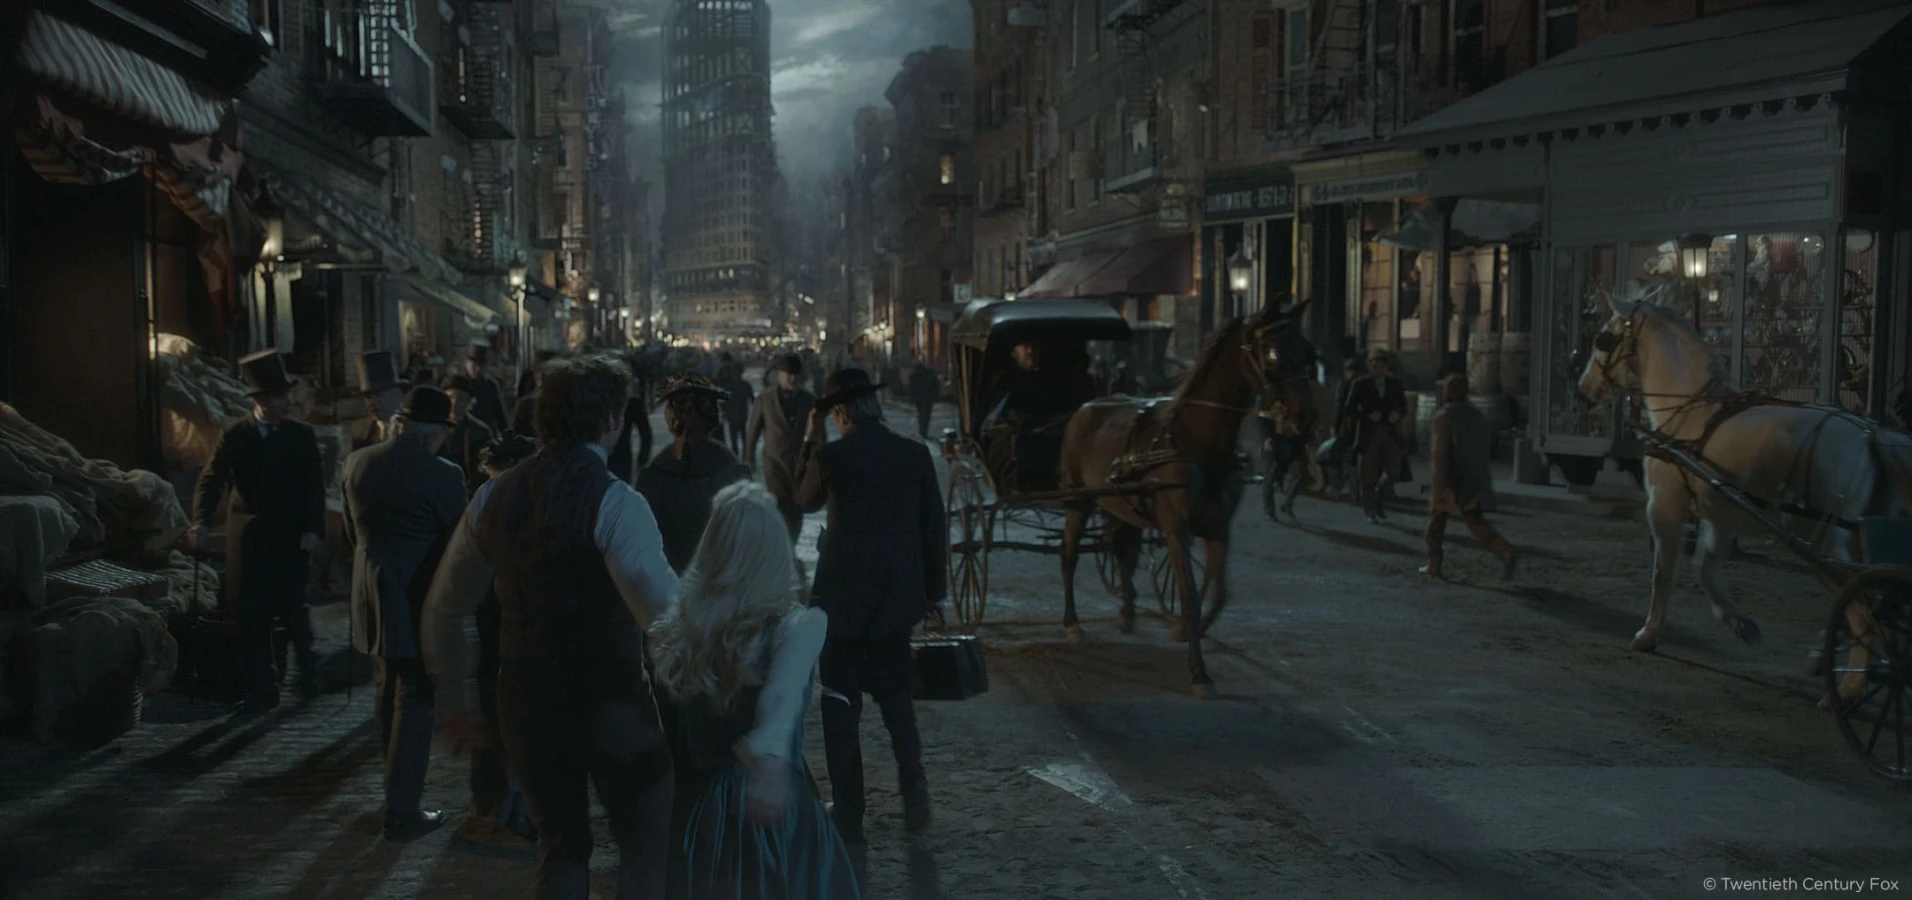  The Greatest Showman city street with horses and night carriage shot Raynault vfx 